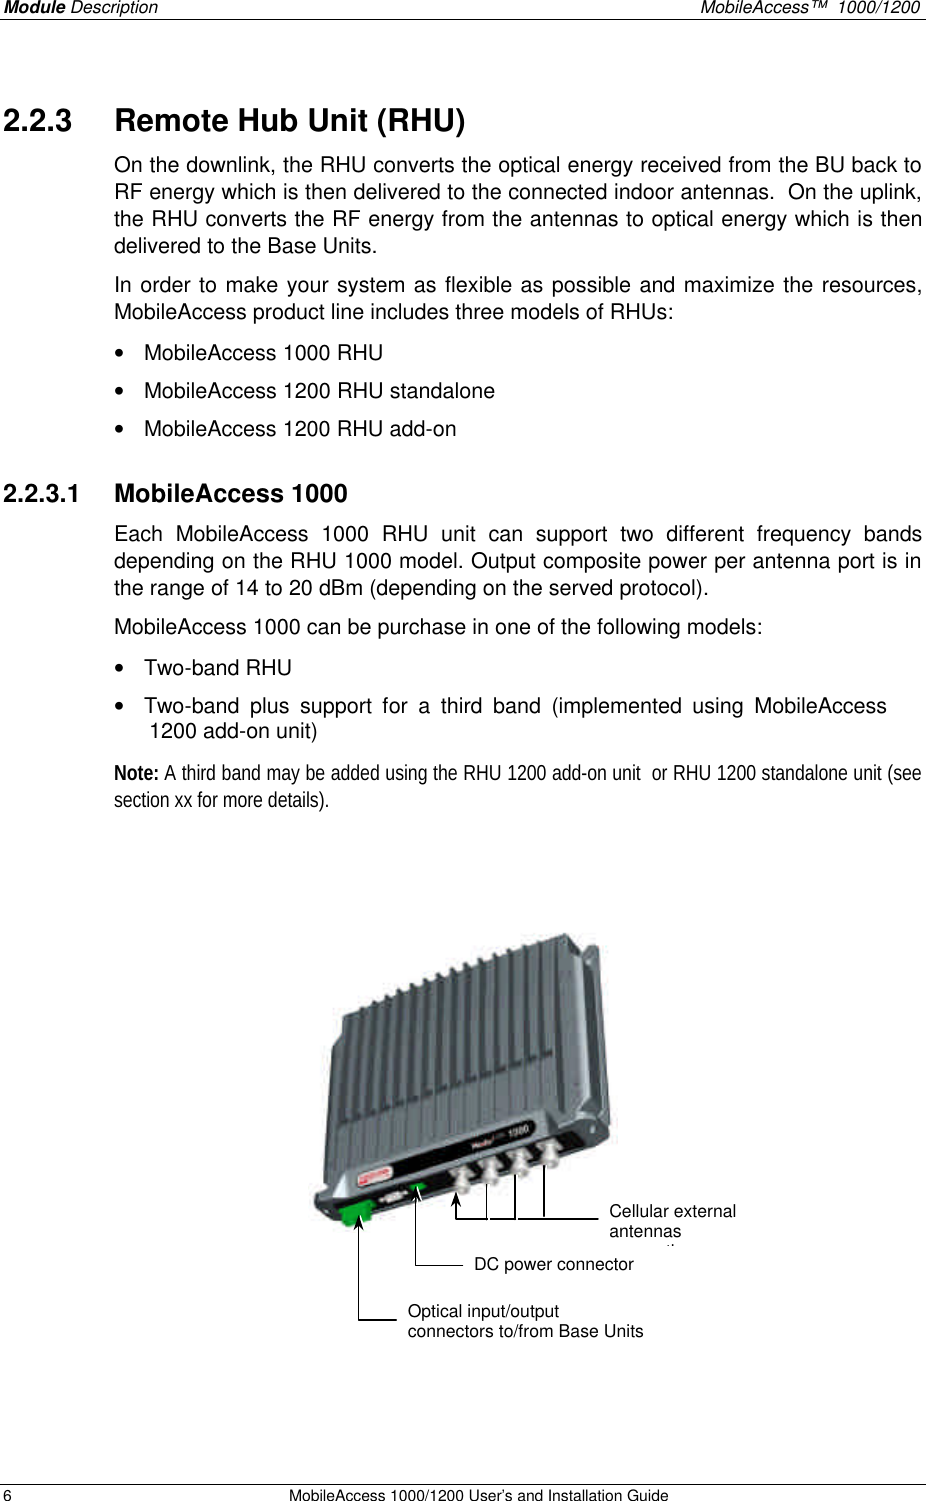 Module Description    MobileAccess™  1000/1200 6 MobileAccess 1000/1200 User’s and Installation Guide  2.2.3  Remote Hub Unit (RHU) On the downlink, the RHU converts the optical energy received from the BU back to RF energy which is then delivered to the connected indoor antennas.  On the uplink, the RHU converts the RF energy from the antennas to optical energy which is then delivered to the Base Units. In order to make your system as flexible as possible and maximize the resources, MobileAccess product line includes three models of RHUs:   • MobileAccess 1000 RHU • MobileAccess 1200 RHU standalone • MobileAccess 1200 RHU add-on 2.2.3.1  MobileAccess 1000 Each MobileAccess 1000 RHU unit can support two different frequency bands depending on the RHU 1000 model. Output composite power per antenna port is in the range of 14 to 20 dBm (depending on the served protocol). MobileAccess 1000 can be purchase in one of the following models: • Two-band RHU • Two-band plus support for a third band (implemented using MobileAccess 1200 add-on unit) Note: A third band may be added using the RHU 1200 add-on unit  or RHU 1200 standalone unit (see section xx for more details).      Cellular external antennas connections Optical input/output connectors to/from Base Units DC power connector 